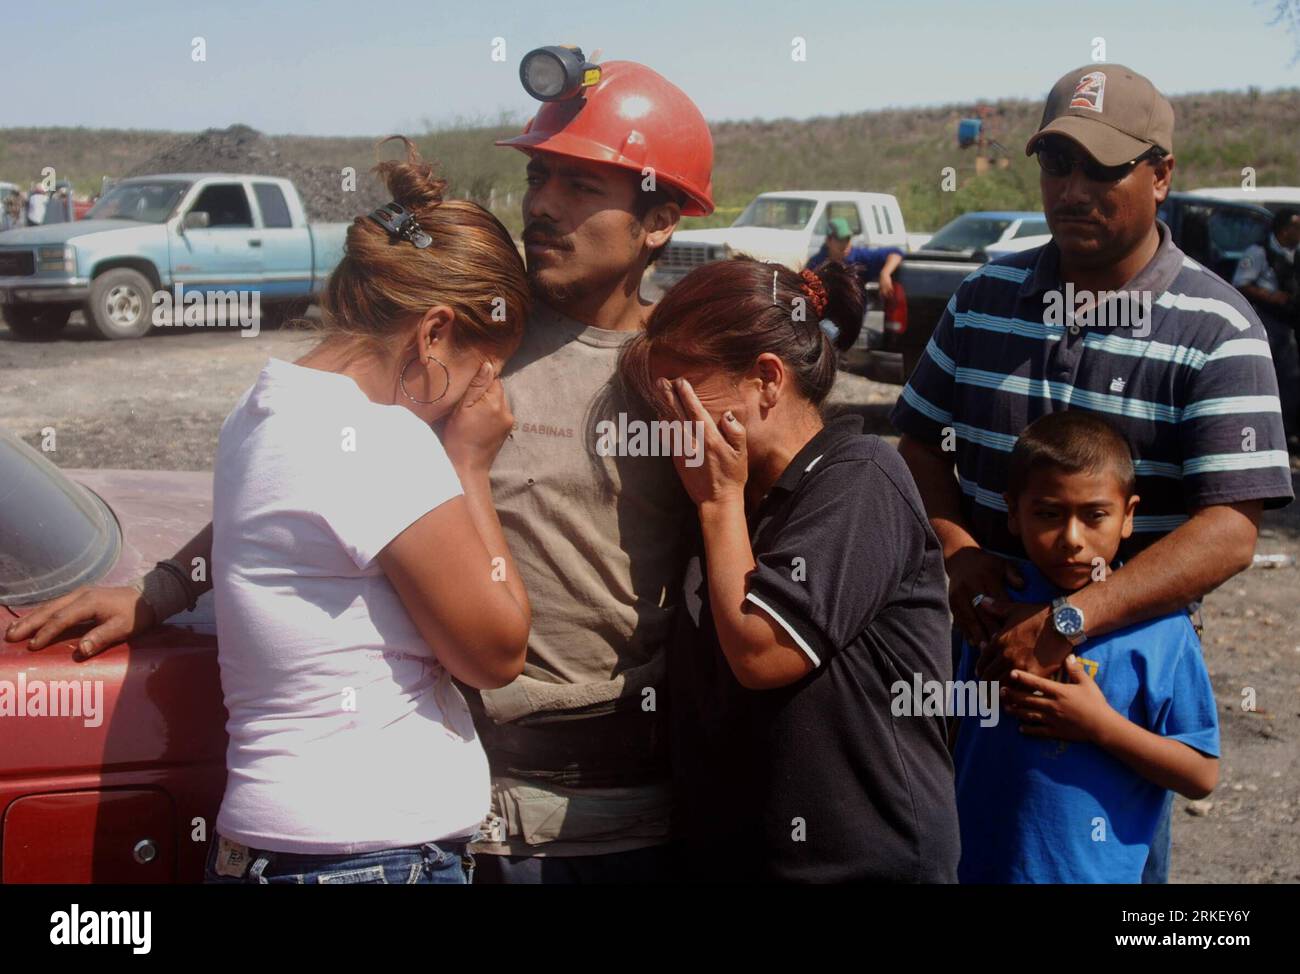 Bildnummer: 55314769  Datum: 04.05.2011  Copyright: imago/Xinhua (110504) -- SAN JUAN DE SABINAS, May 4, 2011 (Xinhua) -- Relatives of trapped miners wait outside a coal mine in the town of San Juan de las Sabinas, Coahuila, northwest Mexico, May 3, 2011. At least 13 Mexican miners were trapped on Tuesday after an explosion in the coal mine caused partial collapse of the structure. (Xinhua/Zocalo Monclova) (MANDATORY CREDIT/NO ARCHIVE/NO SALES/EDITORIAL USE ONLY) MEXICO-SAN JUAN DE SABINAS-MINERS-ACCIDENT PUBLICATIONxNOTxINxCHN Gesellschaft Wirtschaft Mine Unglück Minenunglück kbdig xsk 2011 q Stock Photo